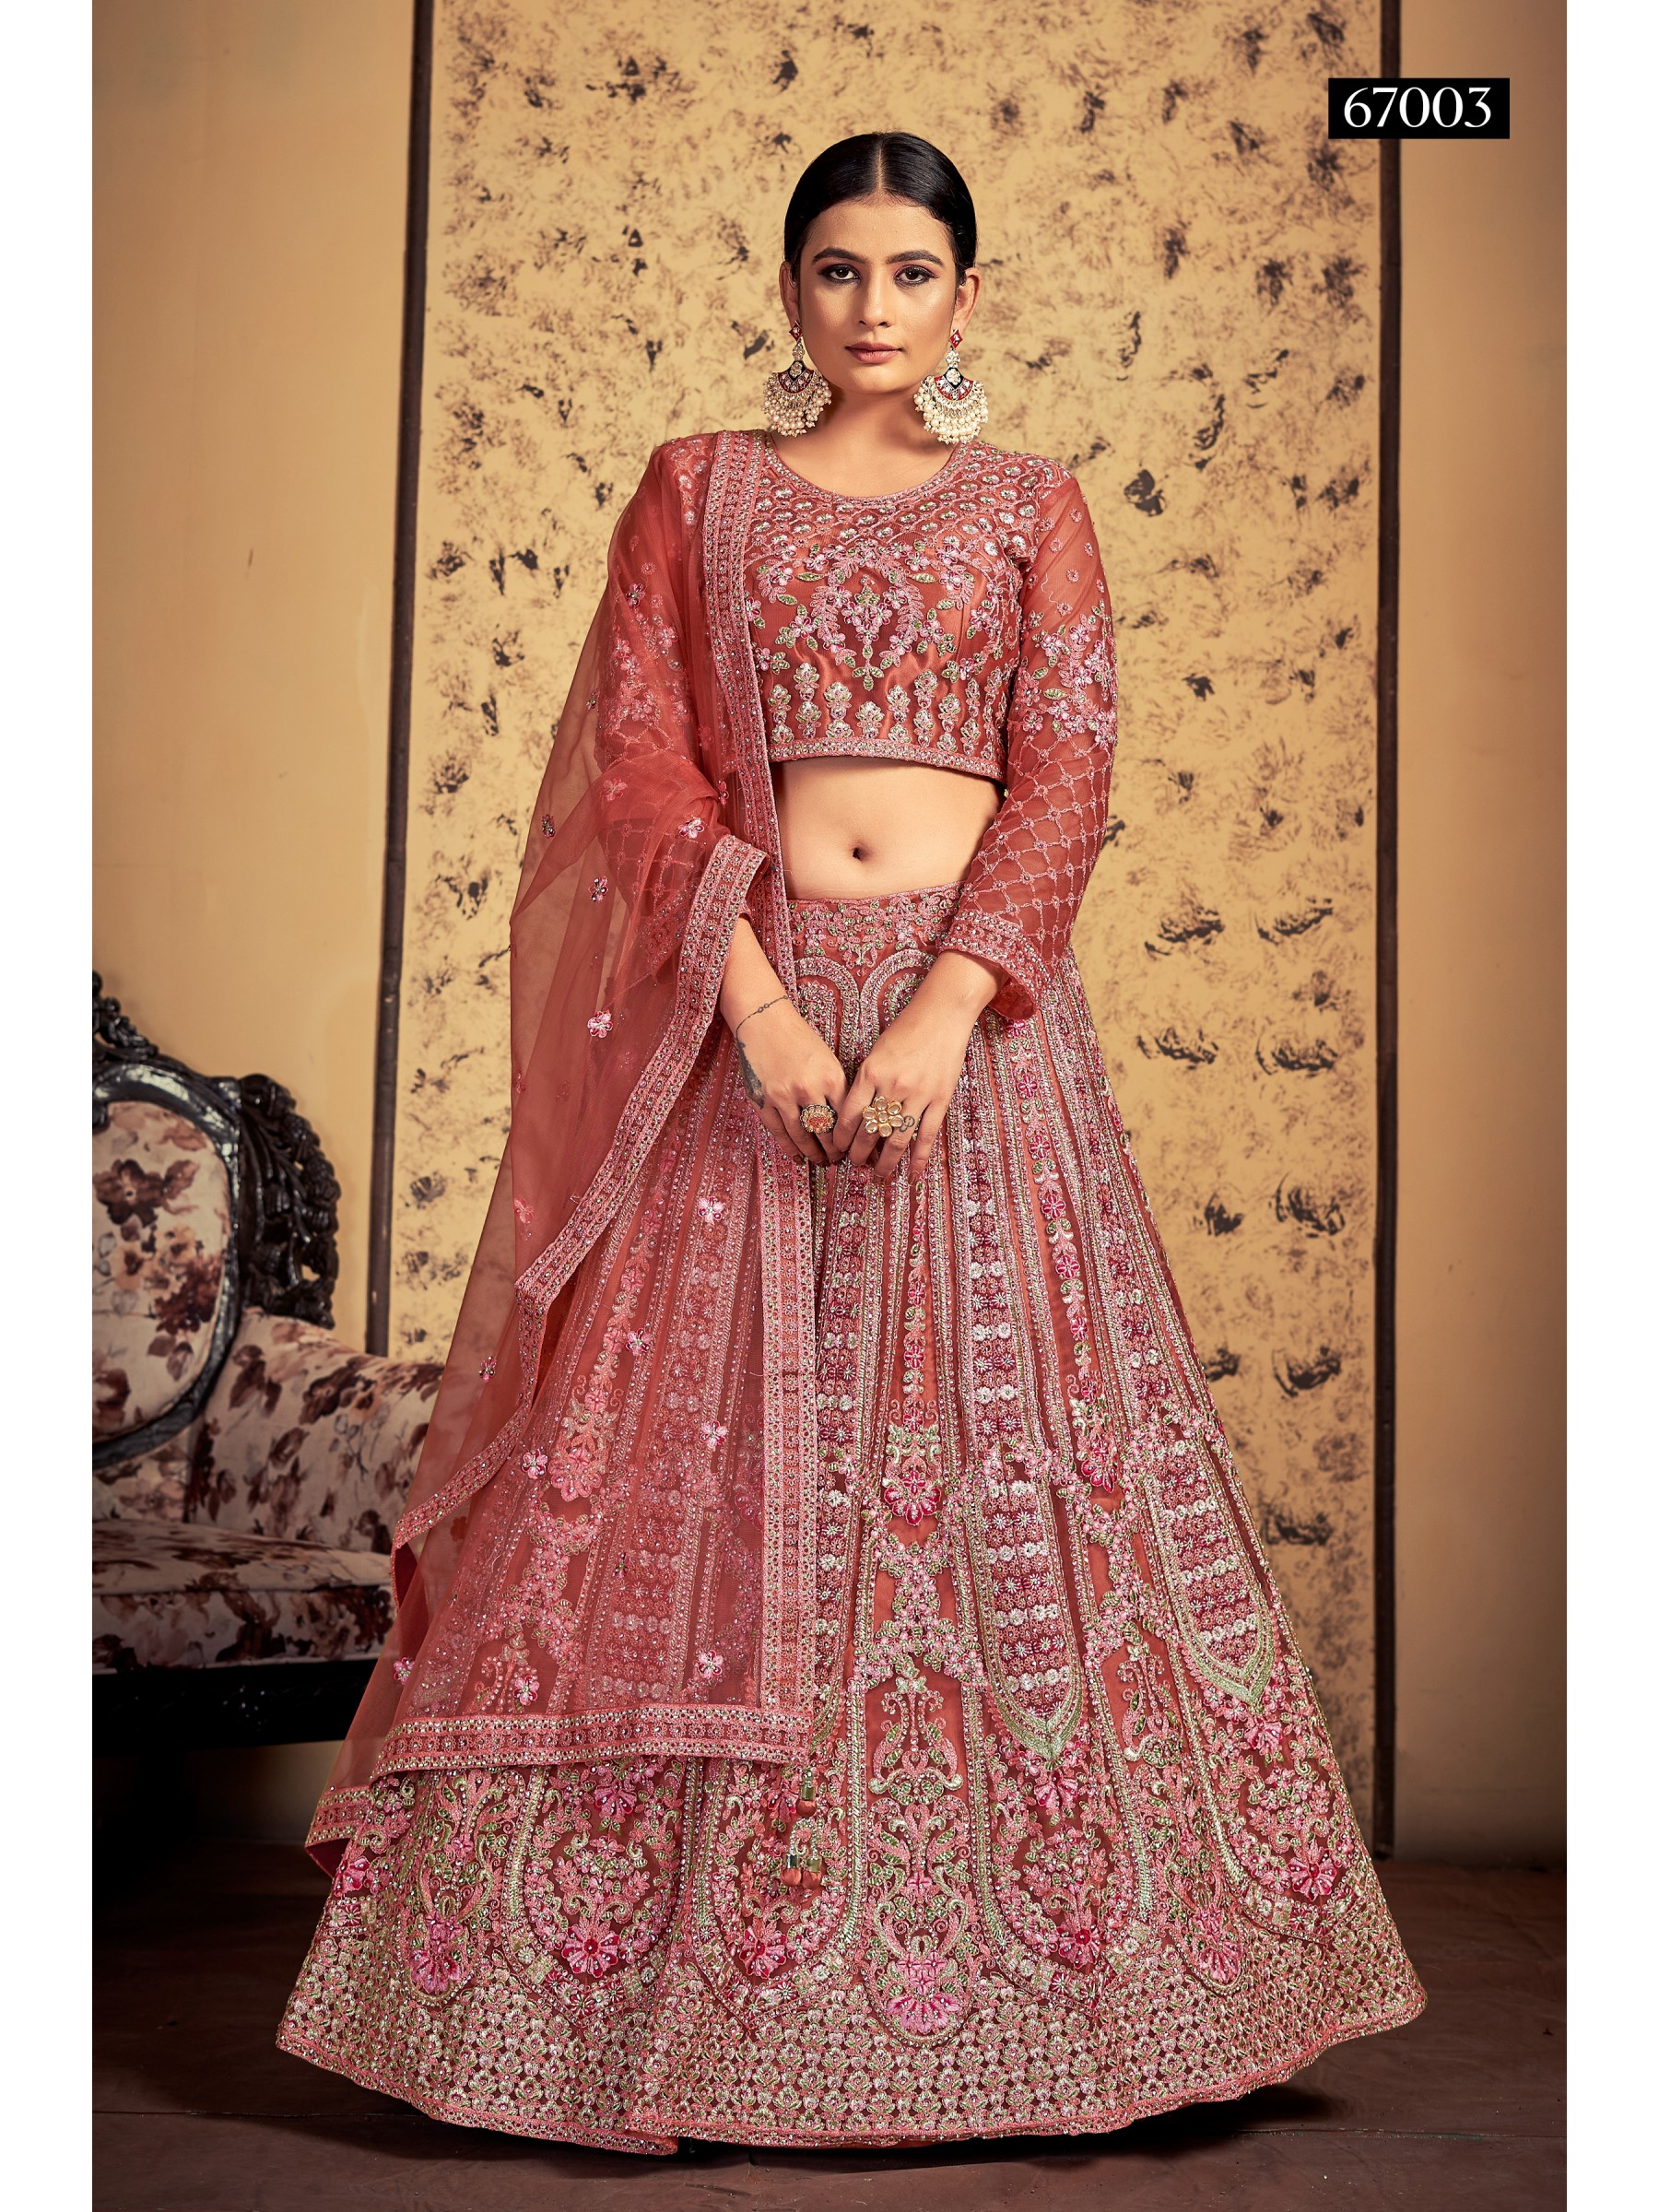 Soft Premium Net Fabrics Wedding Wear Lehenga in Pink Taupe Color With Embroidery Work 